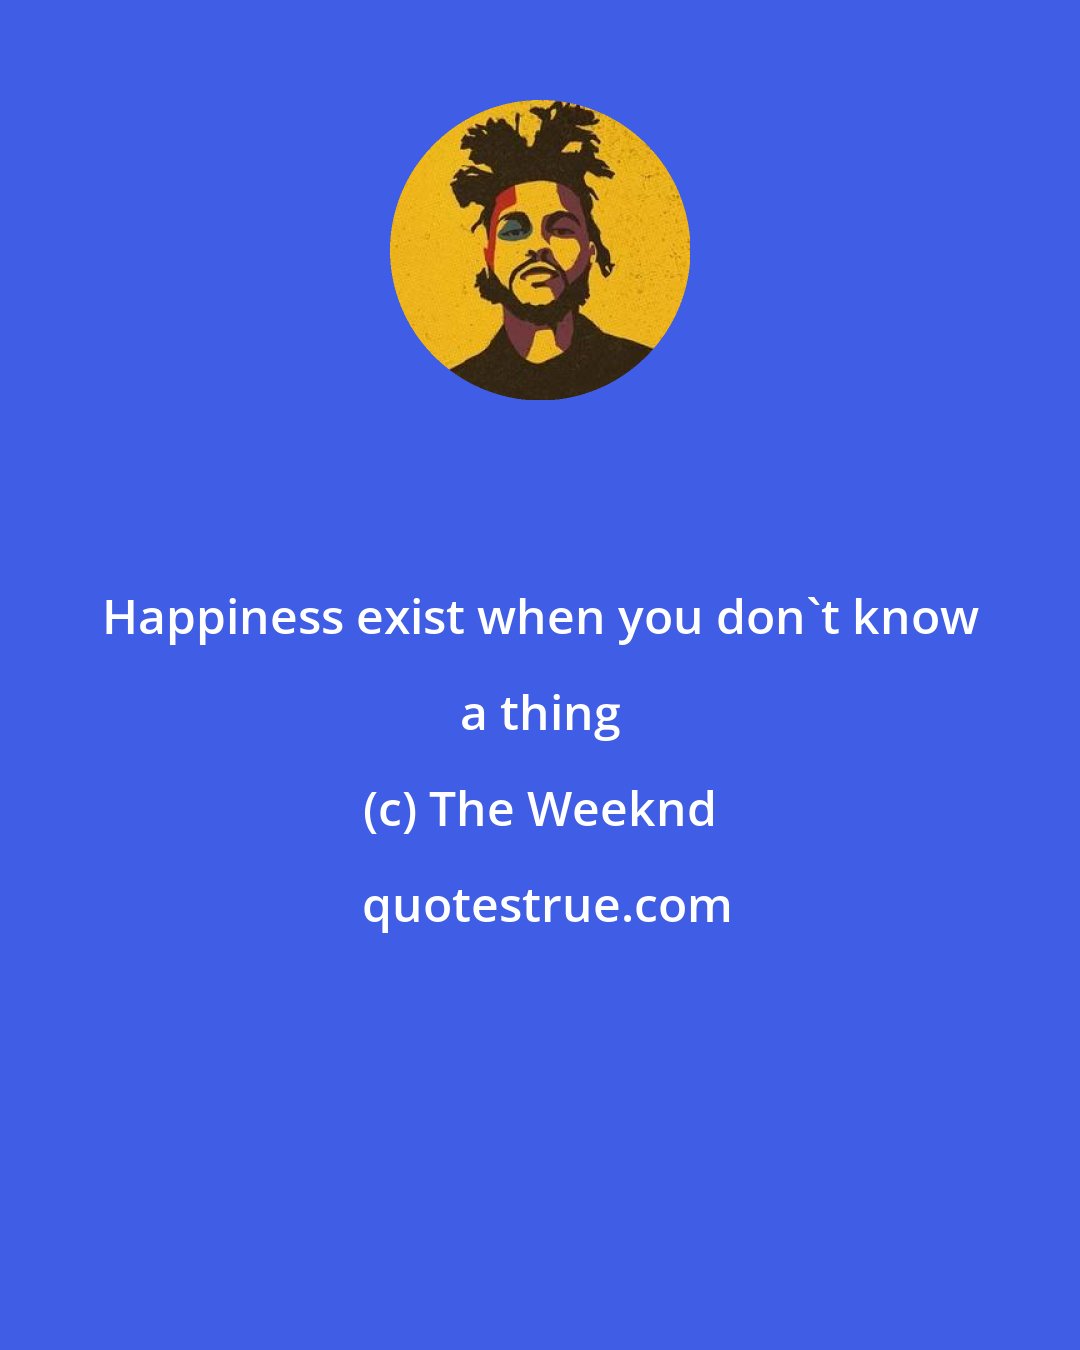 The Weeknd: Happiness exist when you don't know a thing